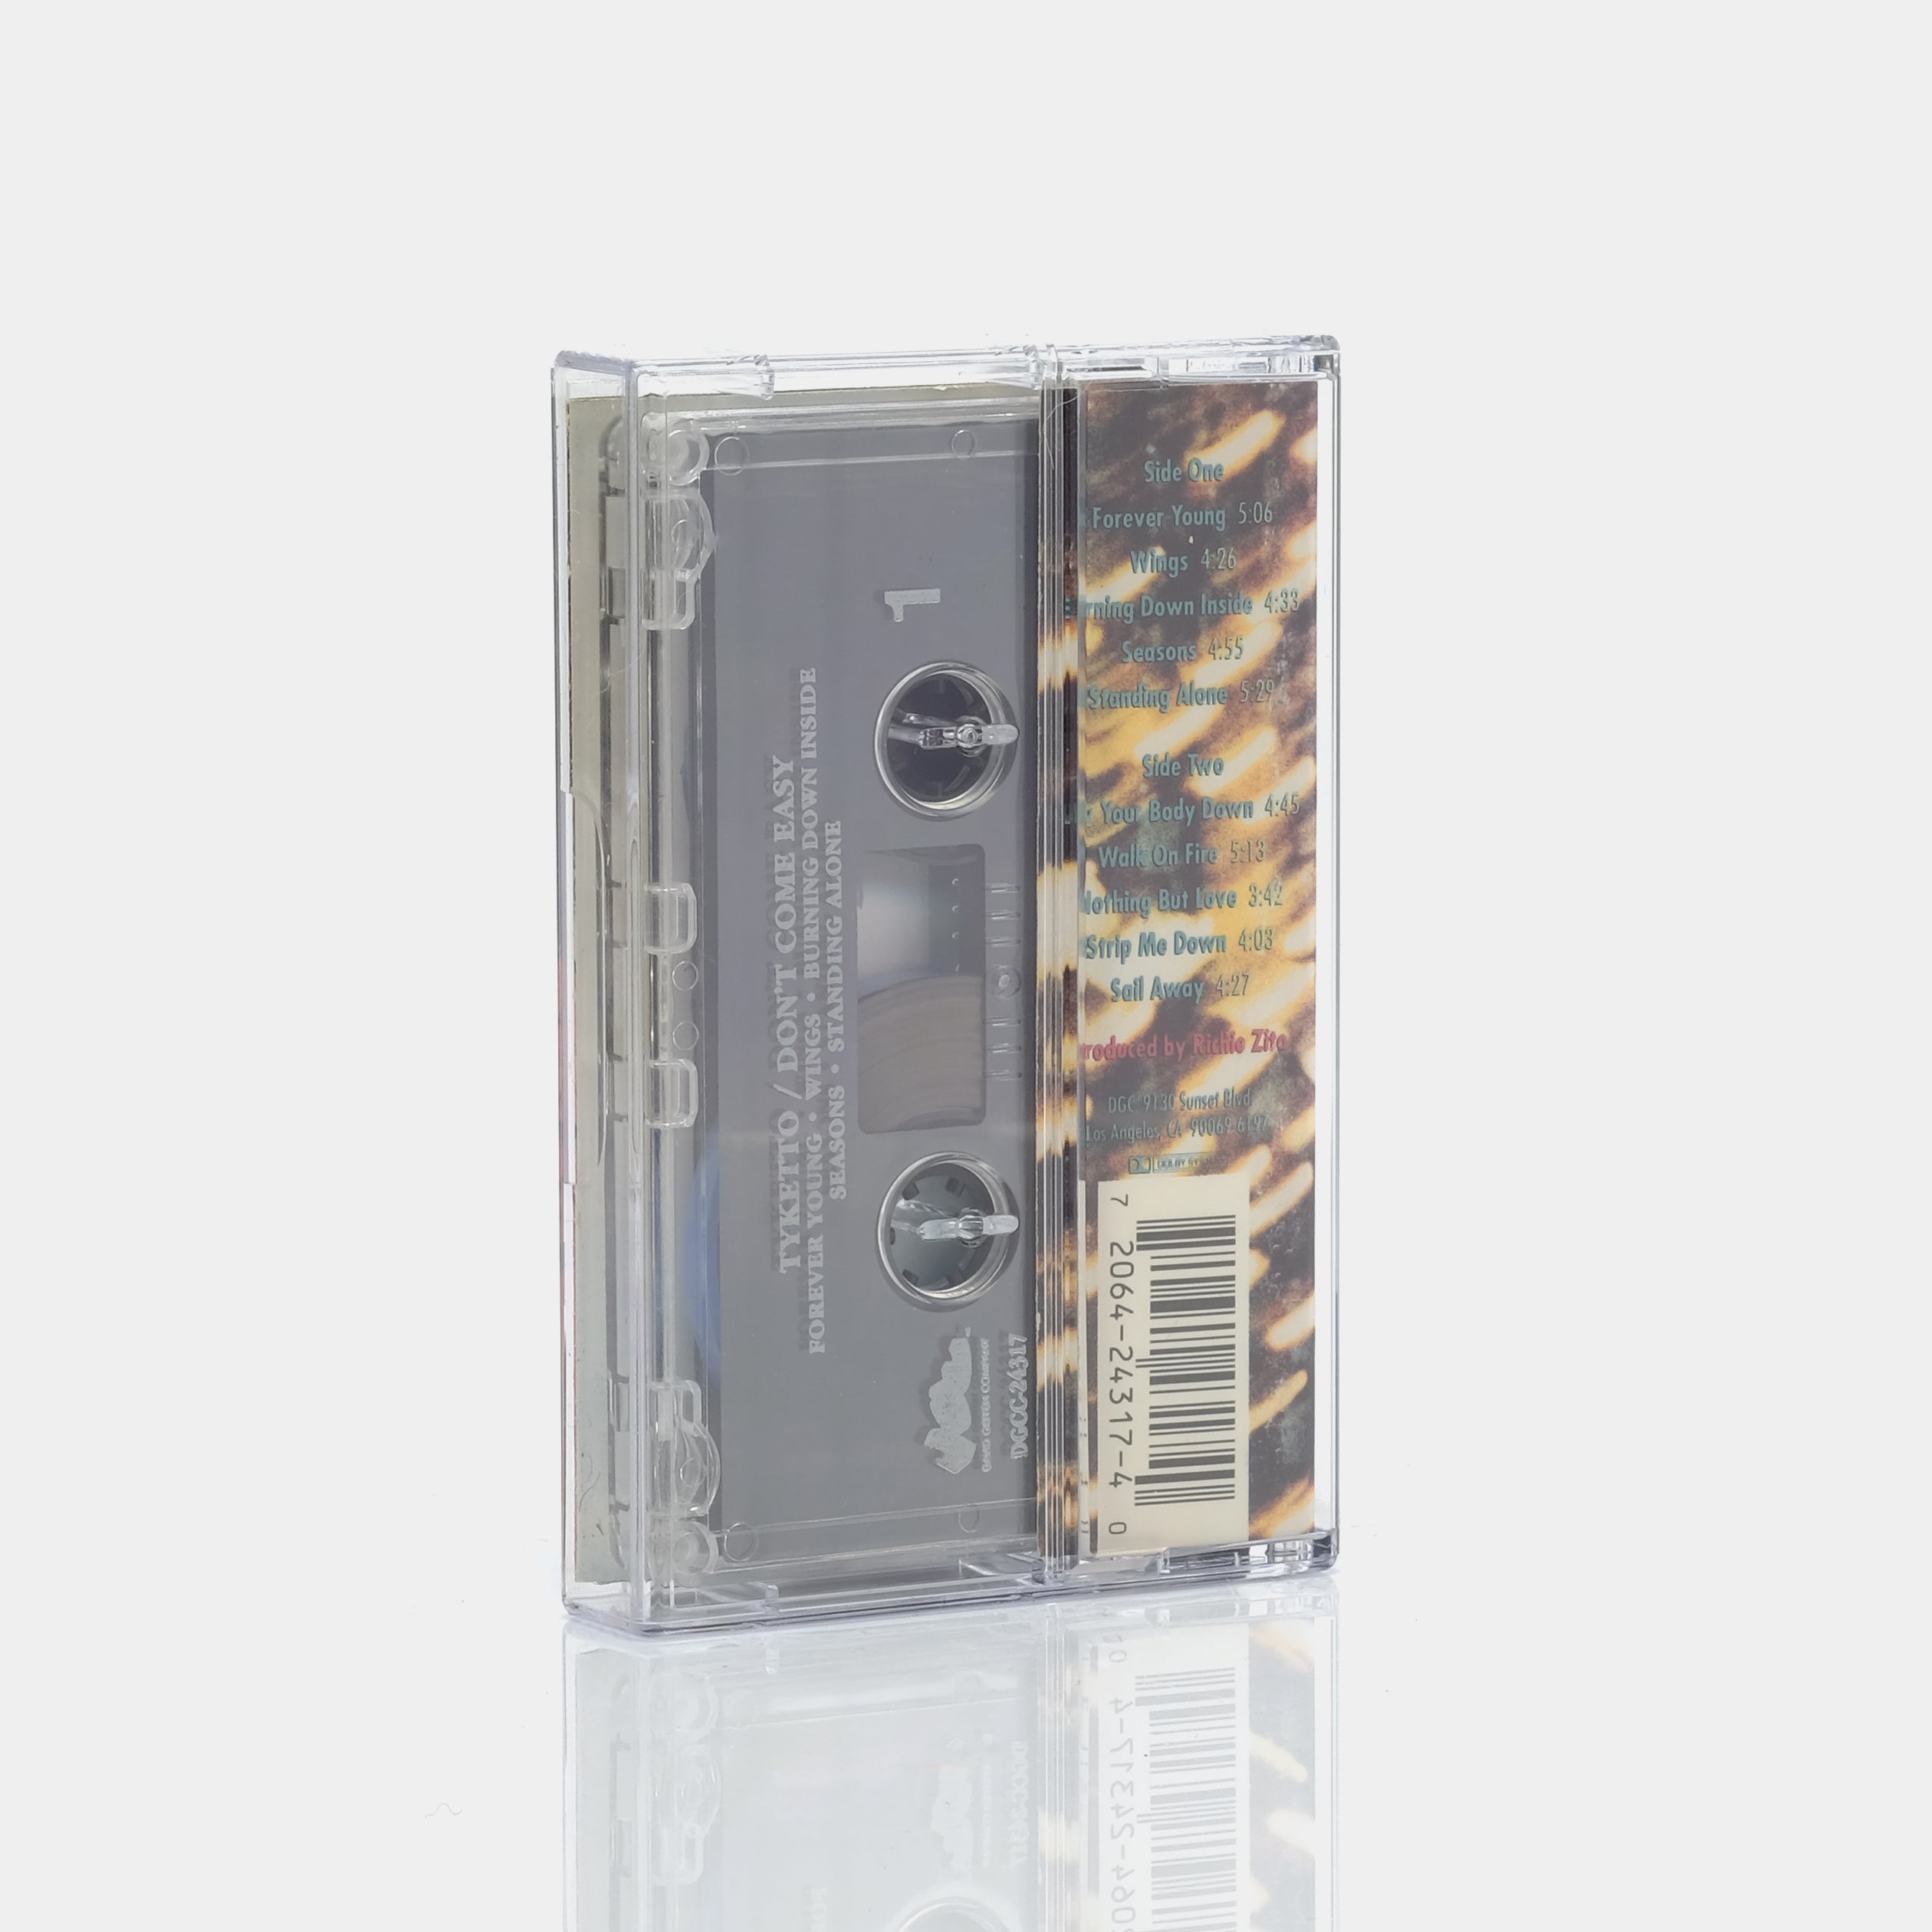 Tyketto - Don't Come Easy Cassette Tape